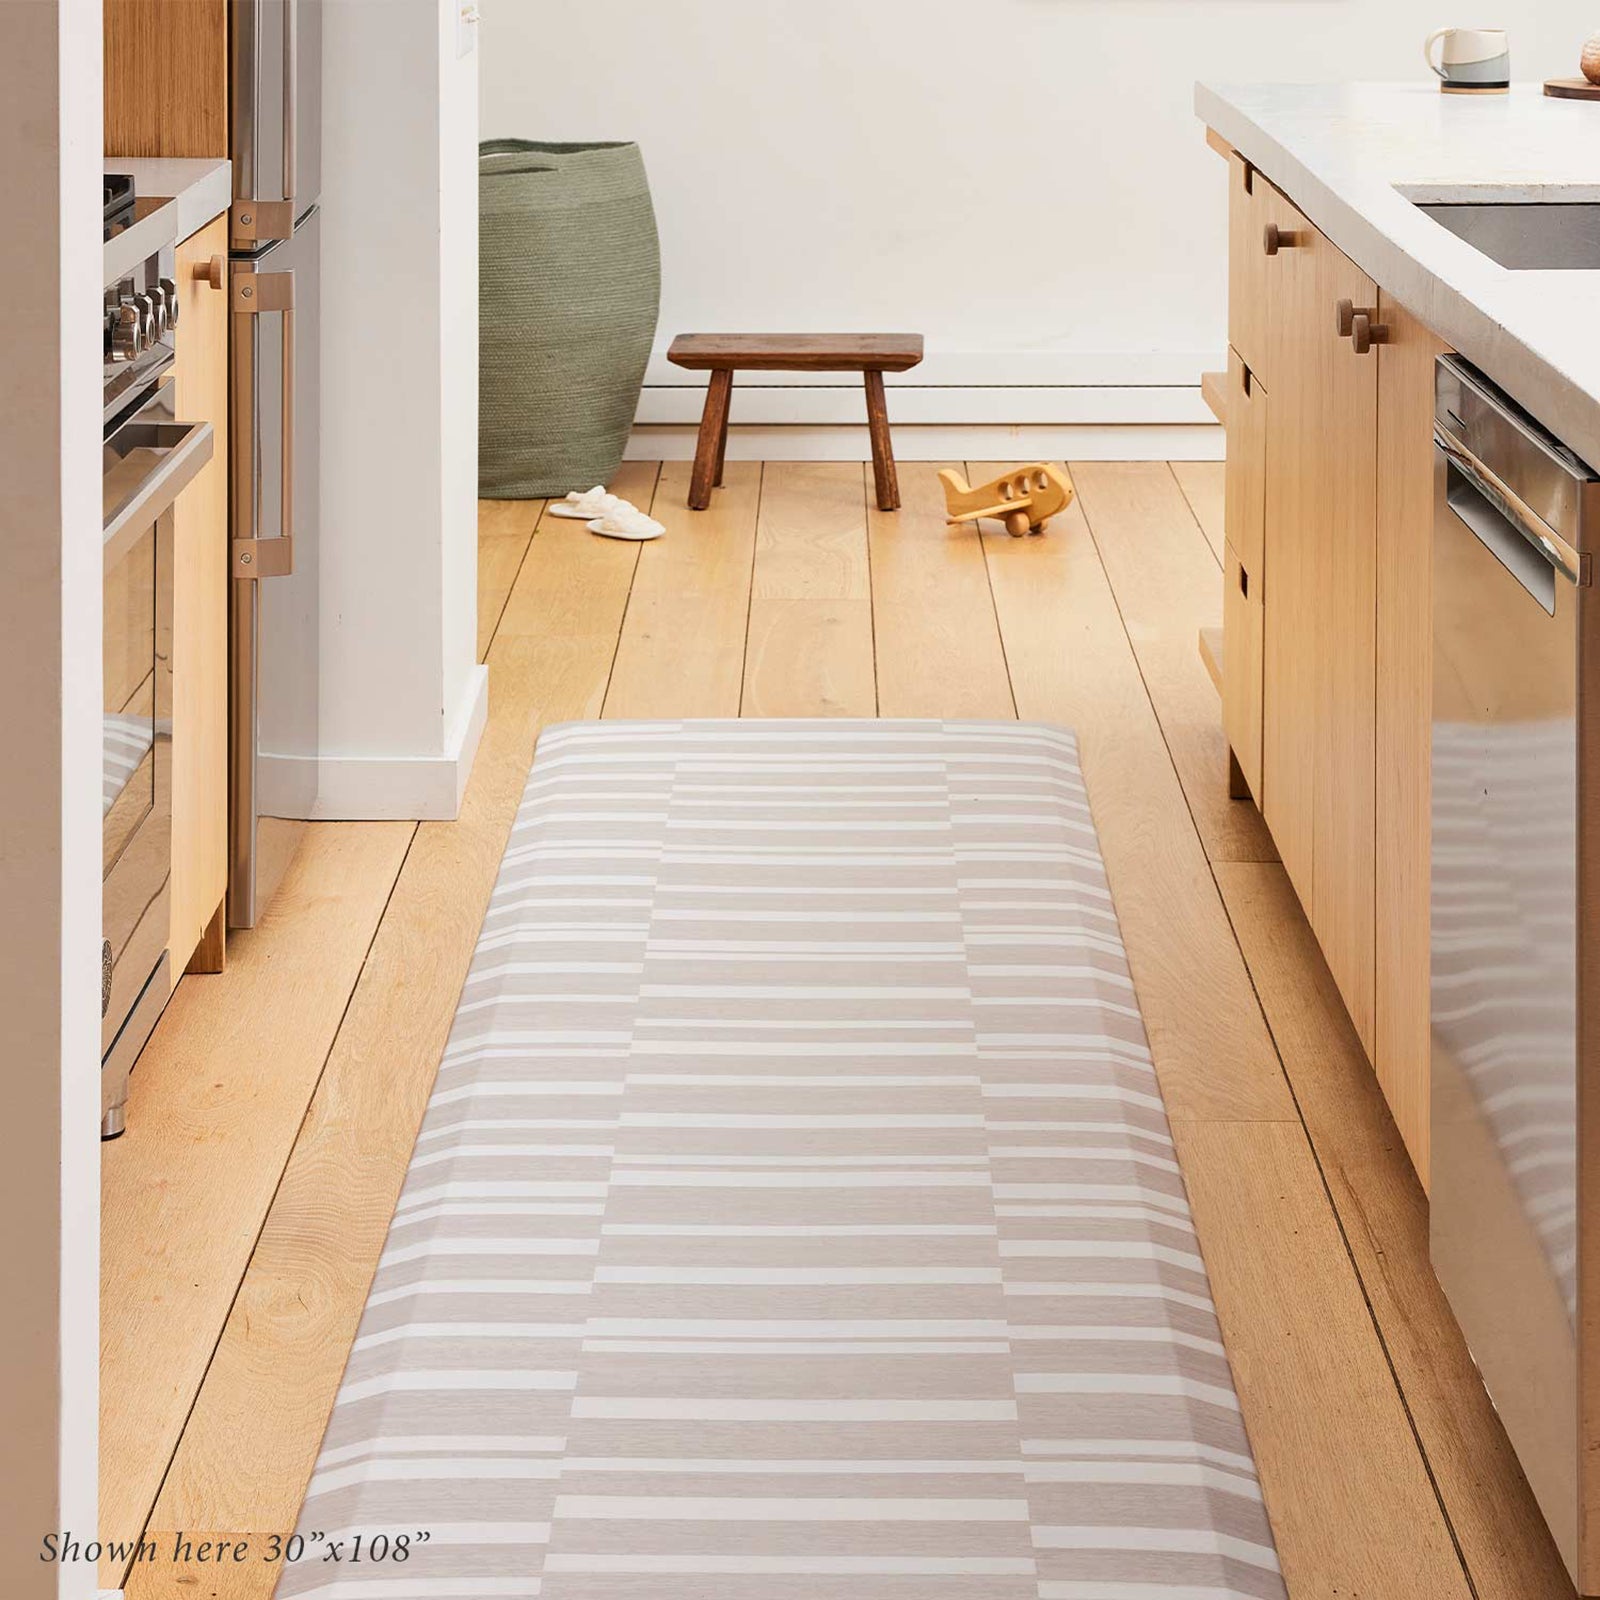 Sutton stripe palomino beige and white inverted stripe standing mat shown in size 30x108 in a light wood tone kitchen in between the counter and island